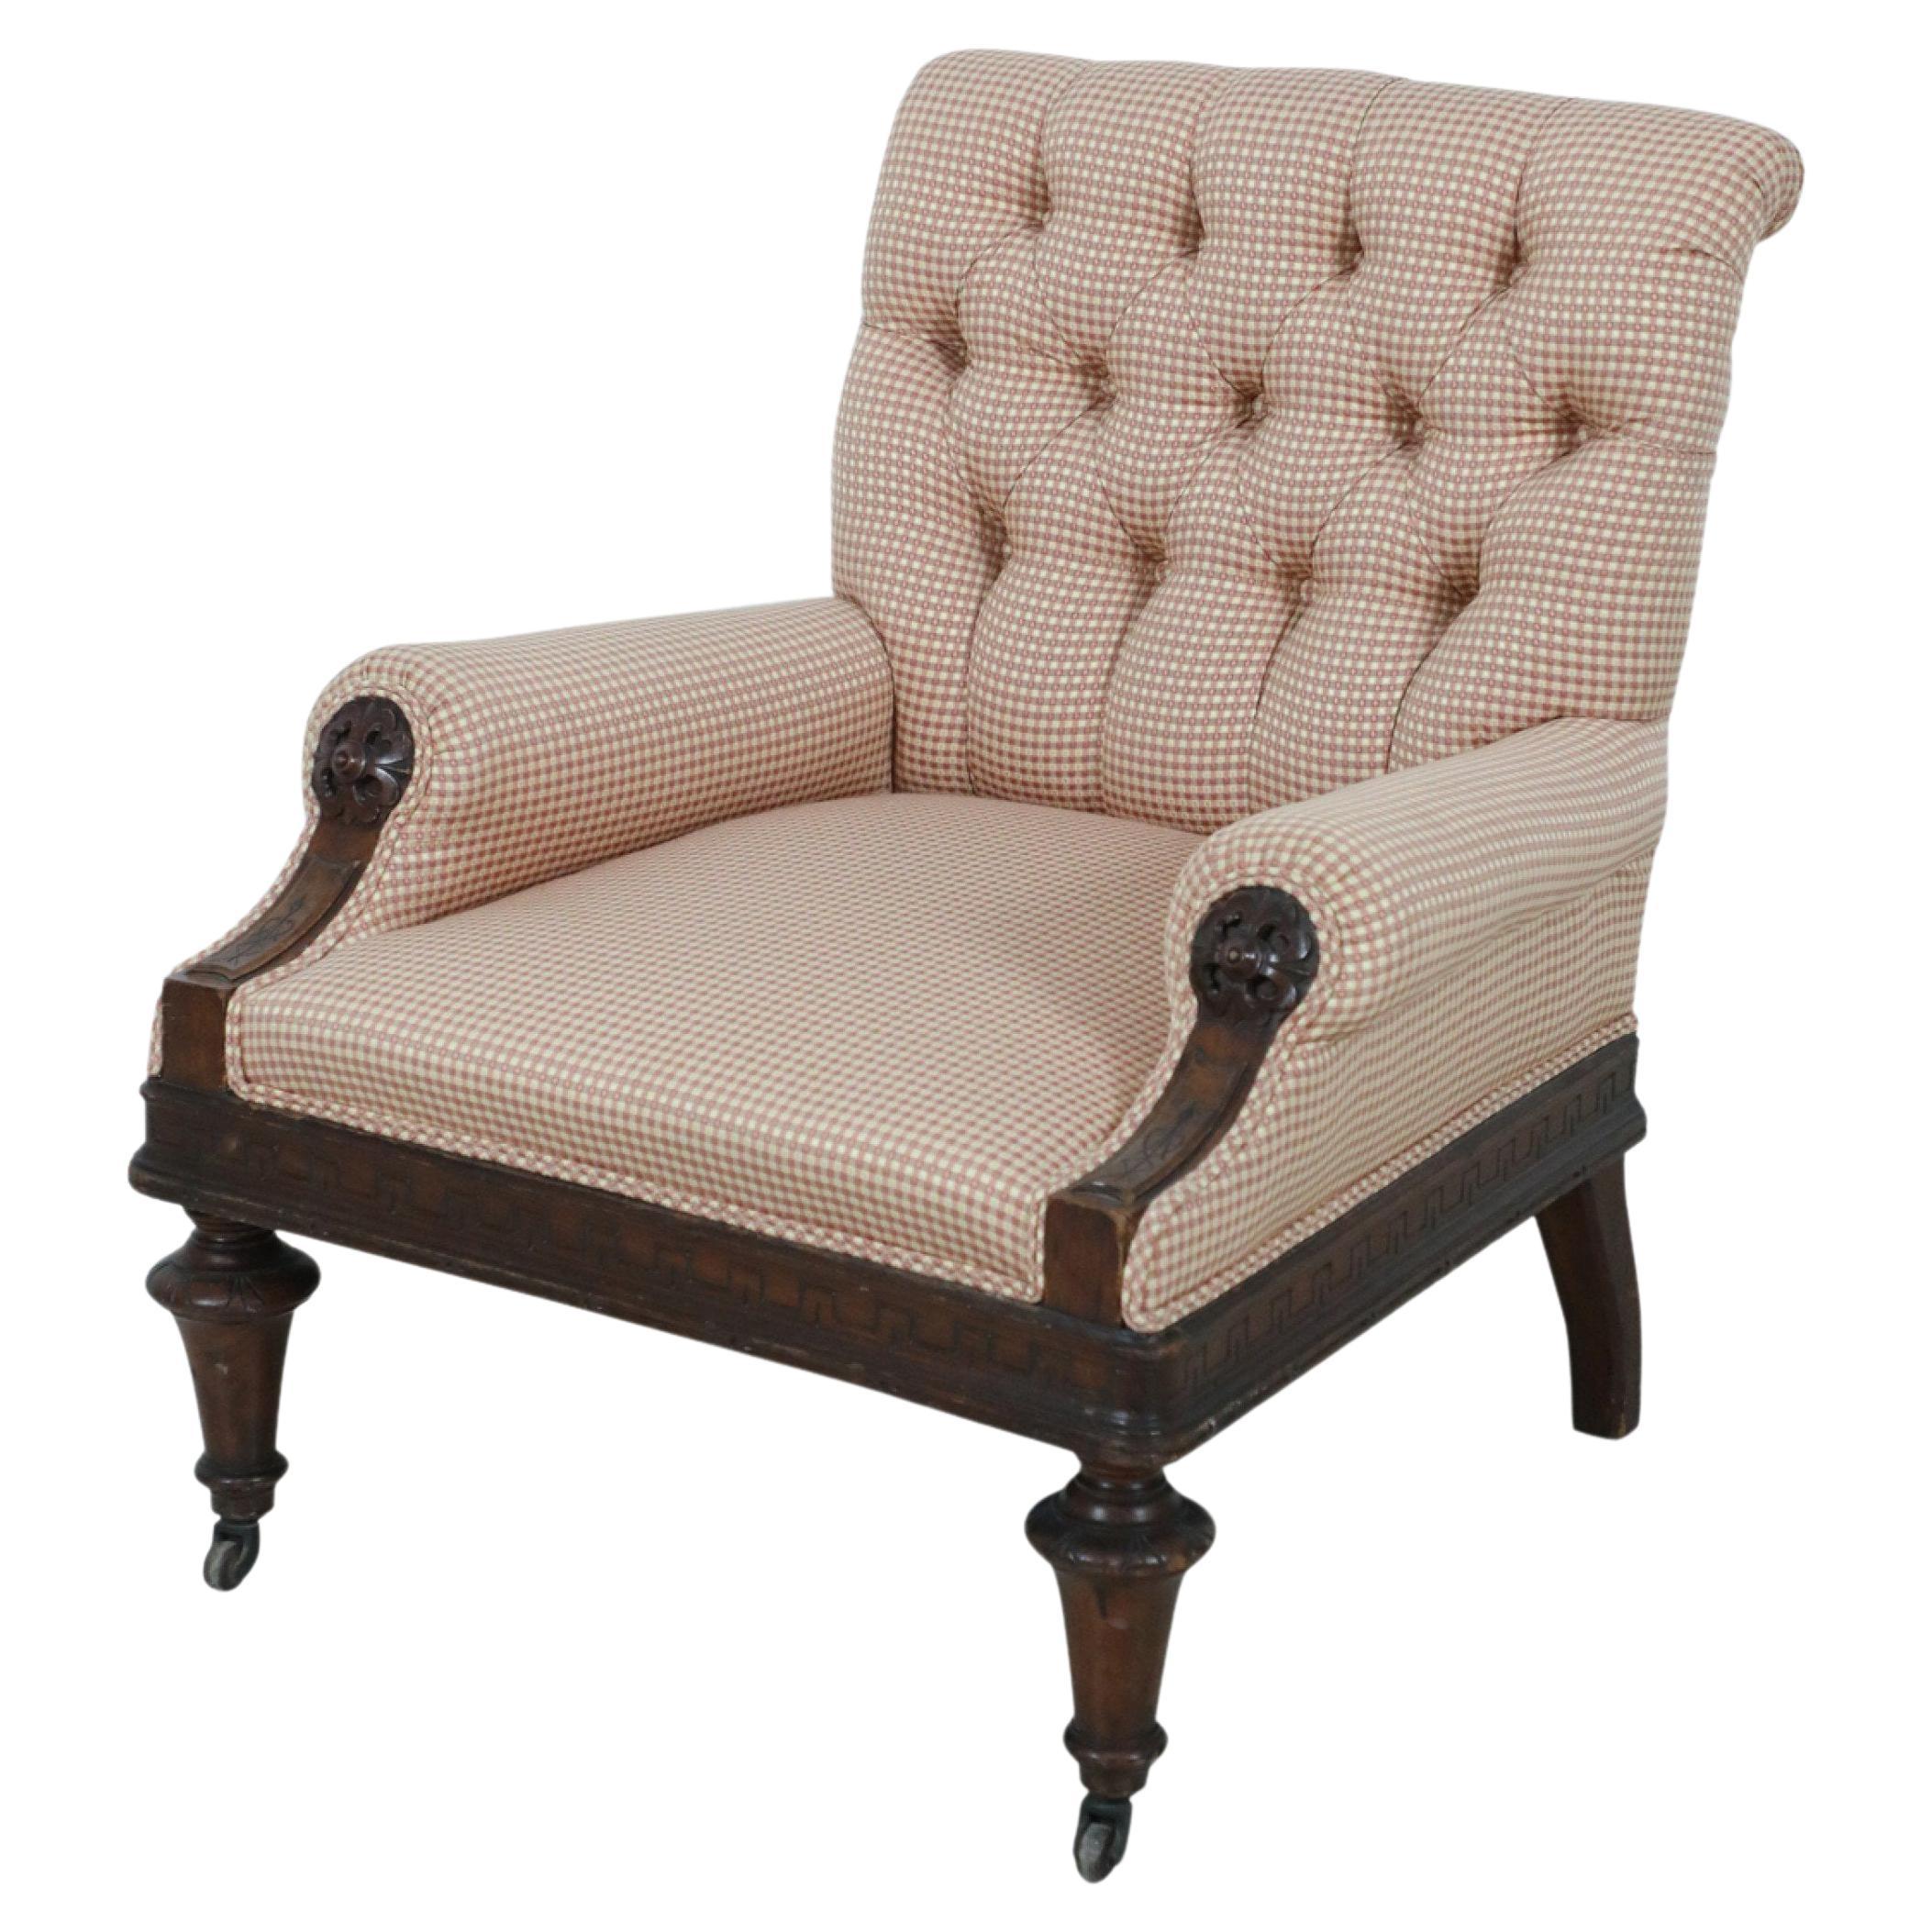 American Victorian Tufted Upholstered Red and Beige Checkered Mahogany Armchair